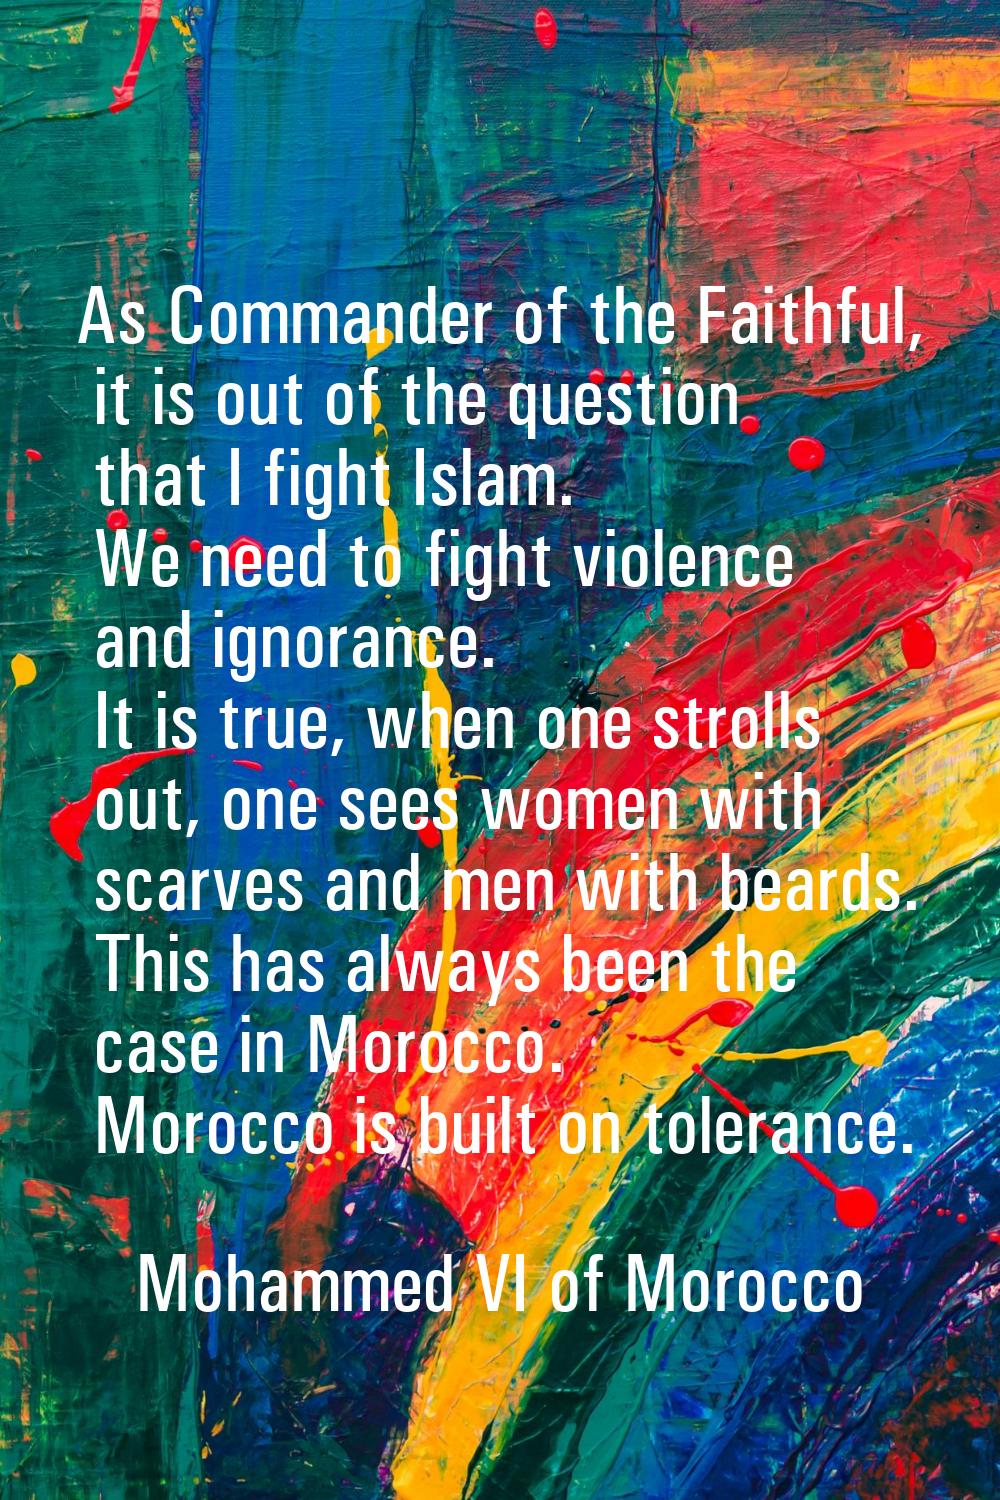 As Commander of the Faithful, it is out of the question that I fight Islam. We need to fight violen